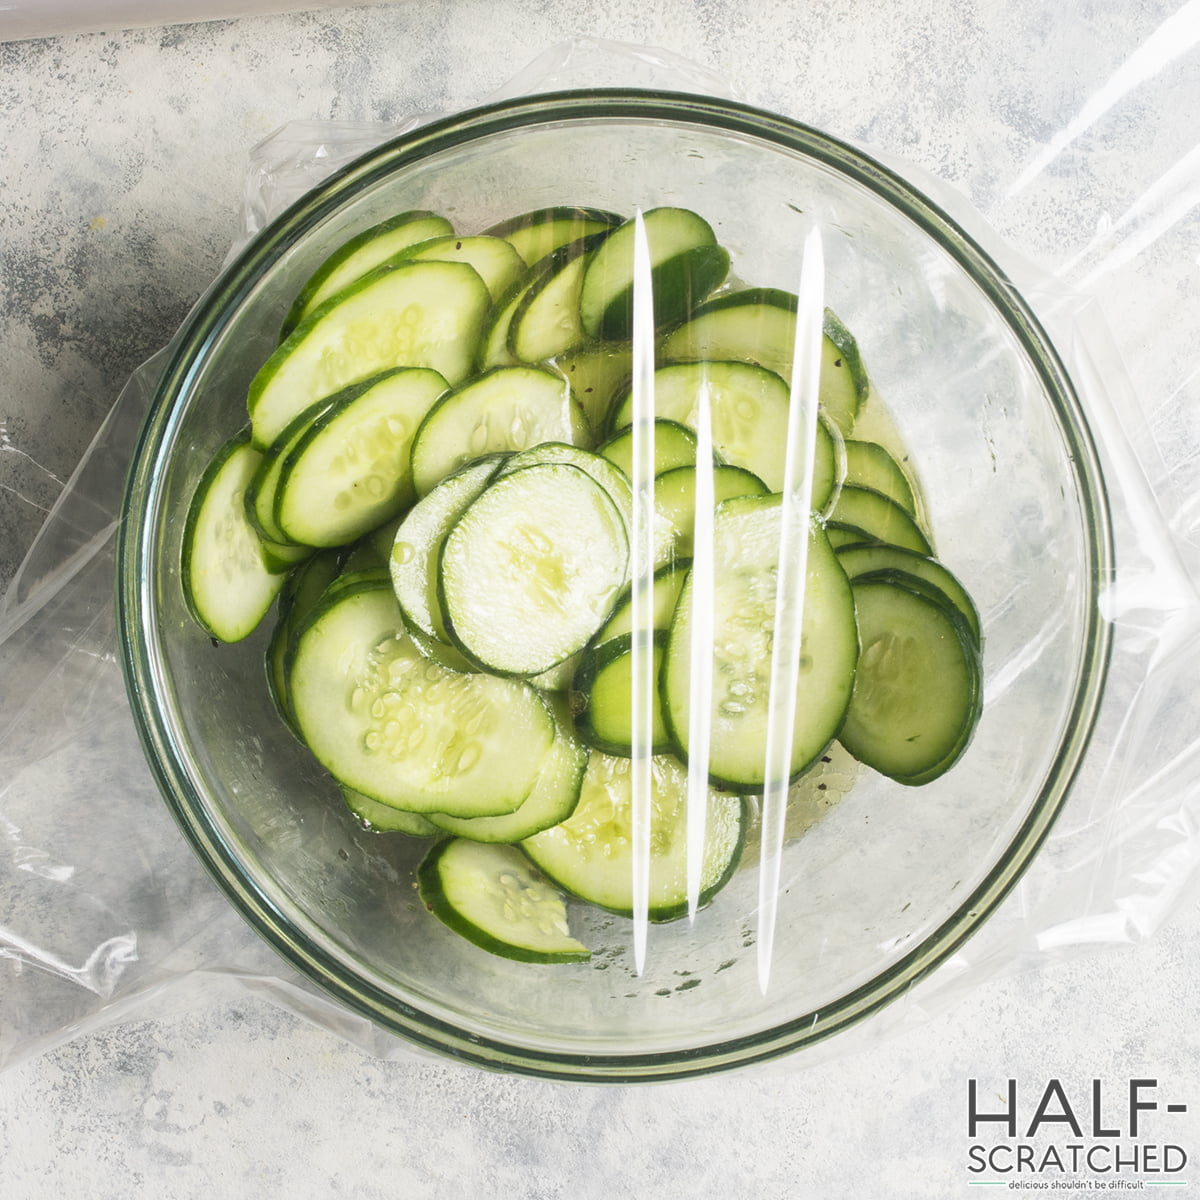 Covering cucumber slices with plastic wrap